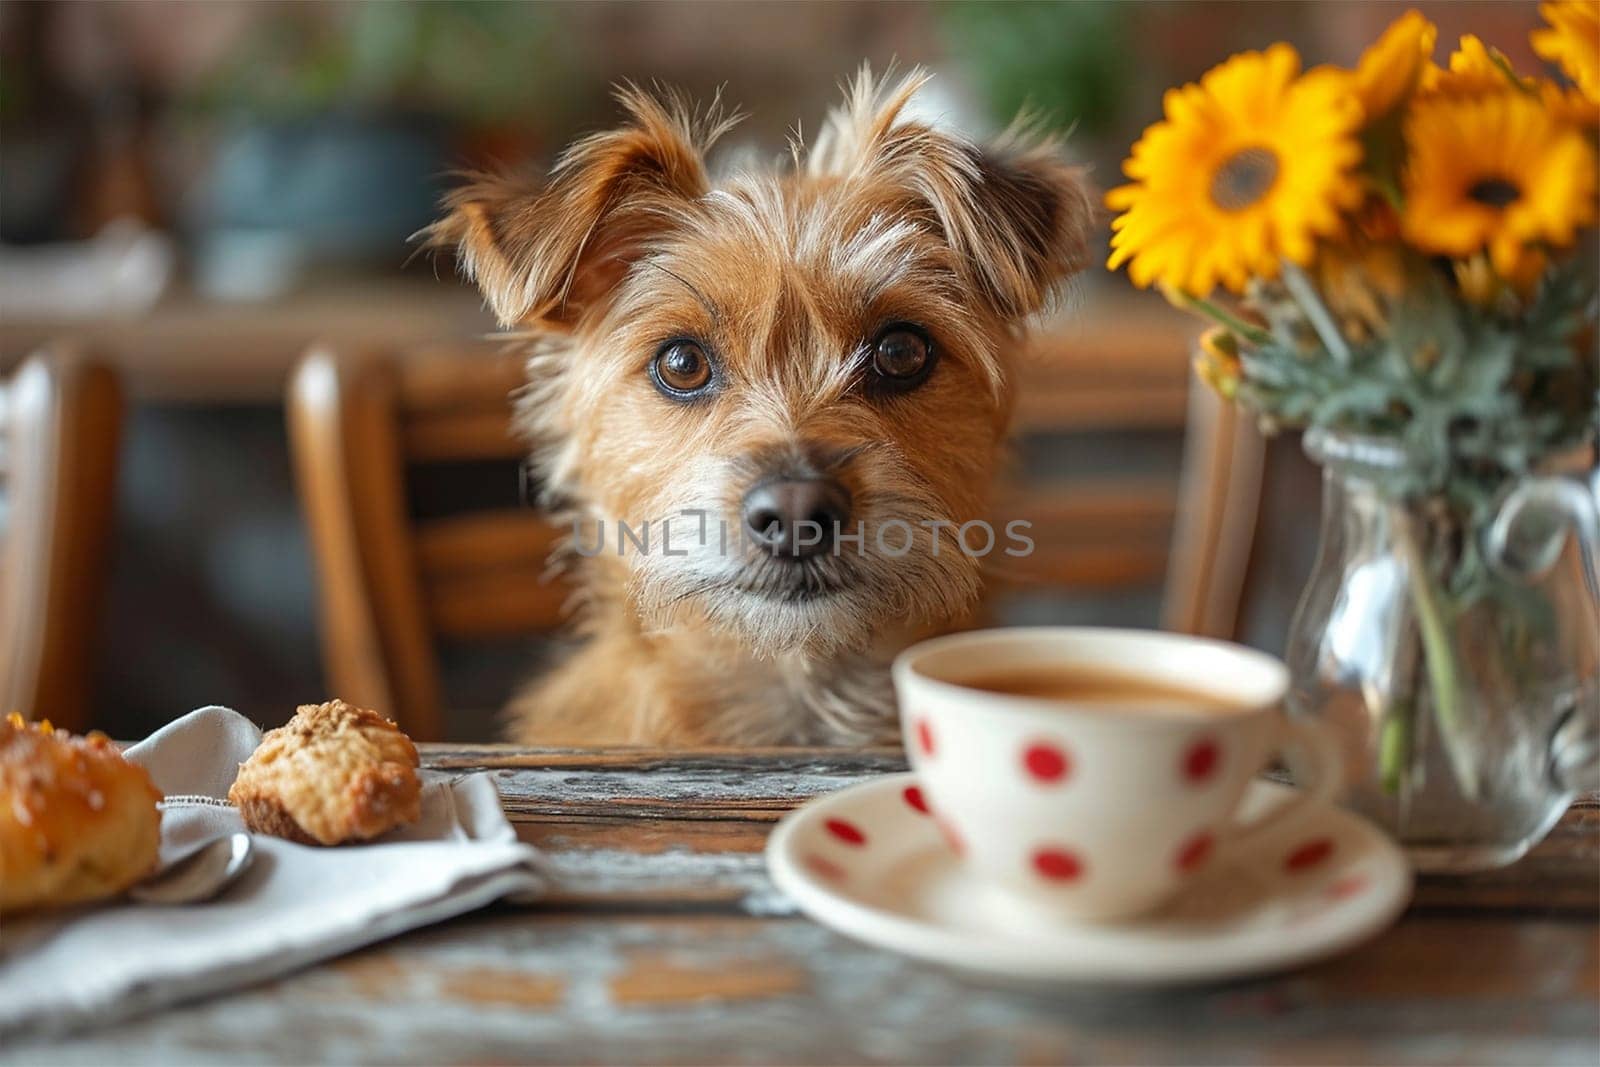 Cute dog having nice breakfast sitting at the table with tea,coffee bread at the kitchen stylish interior. Cozy house with funny dog at lunch pet